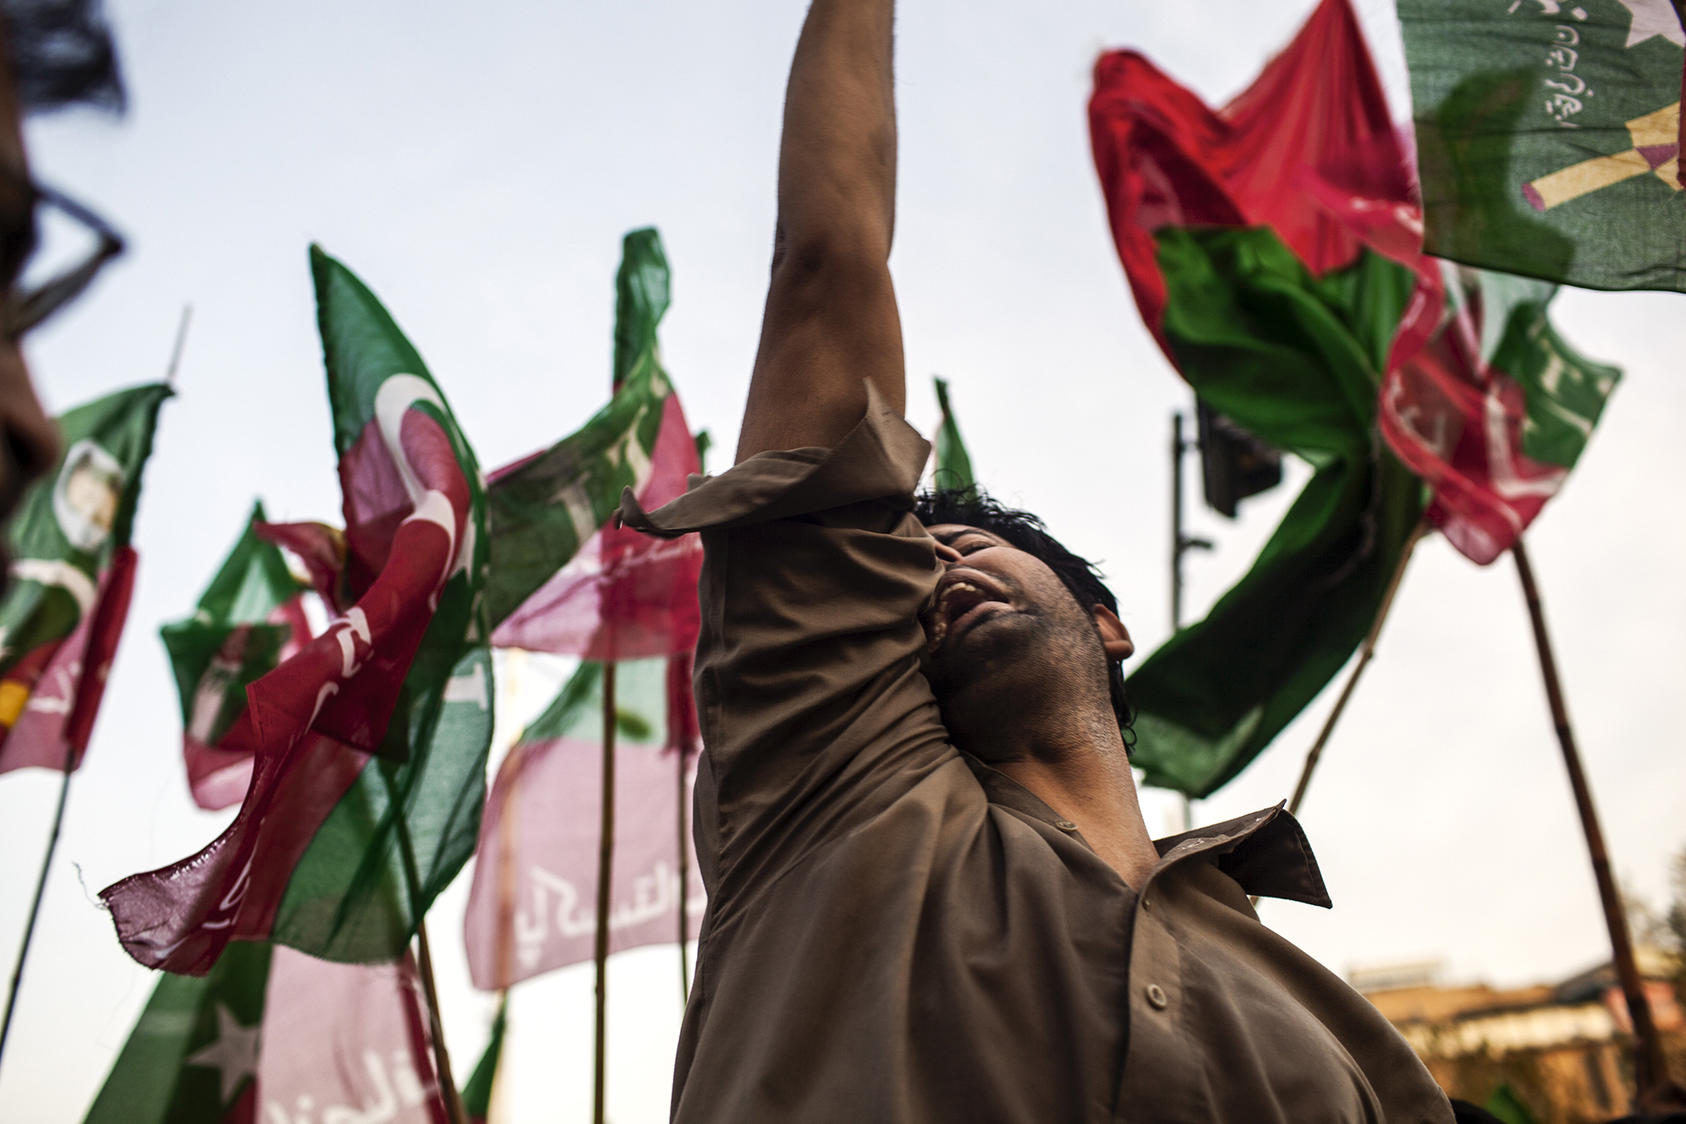 A supporter of the Pakistan Tehreek-e-Insaf (PTI) party of former cricket star Imran Khan demonstrates in Islamabad, Pakistan.